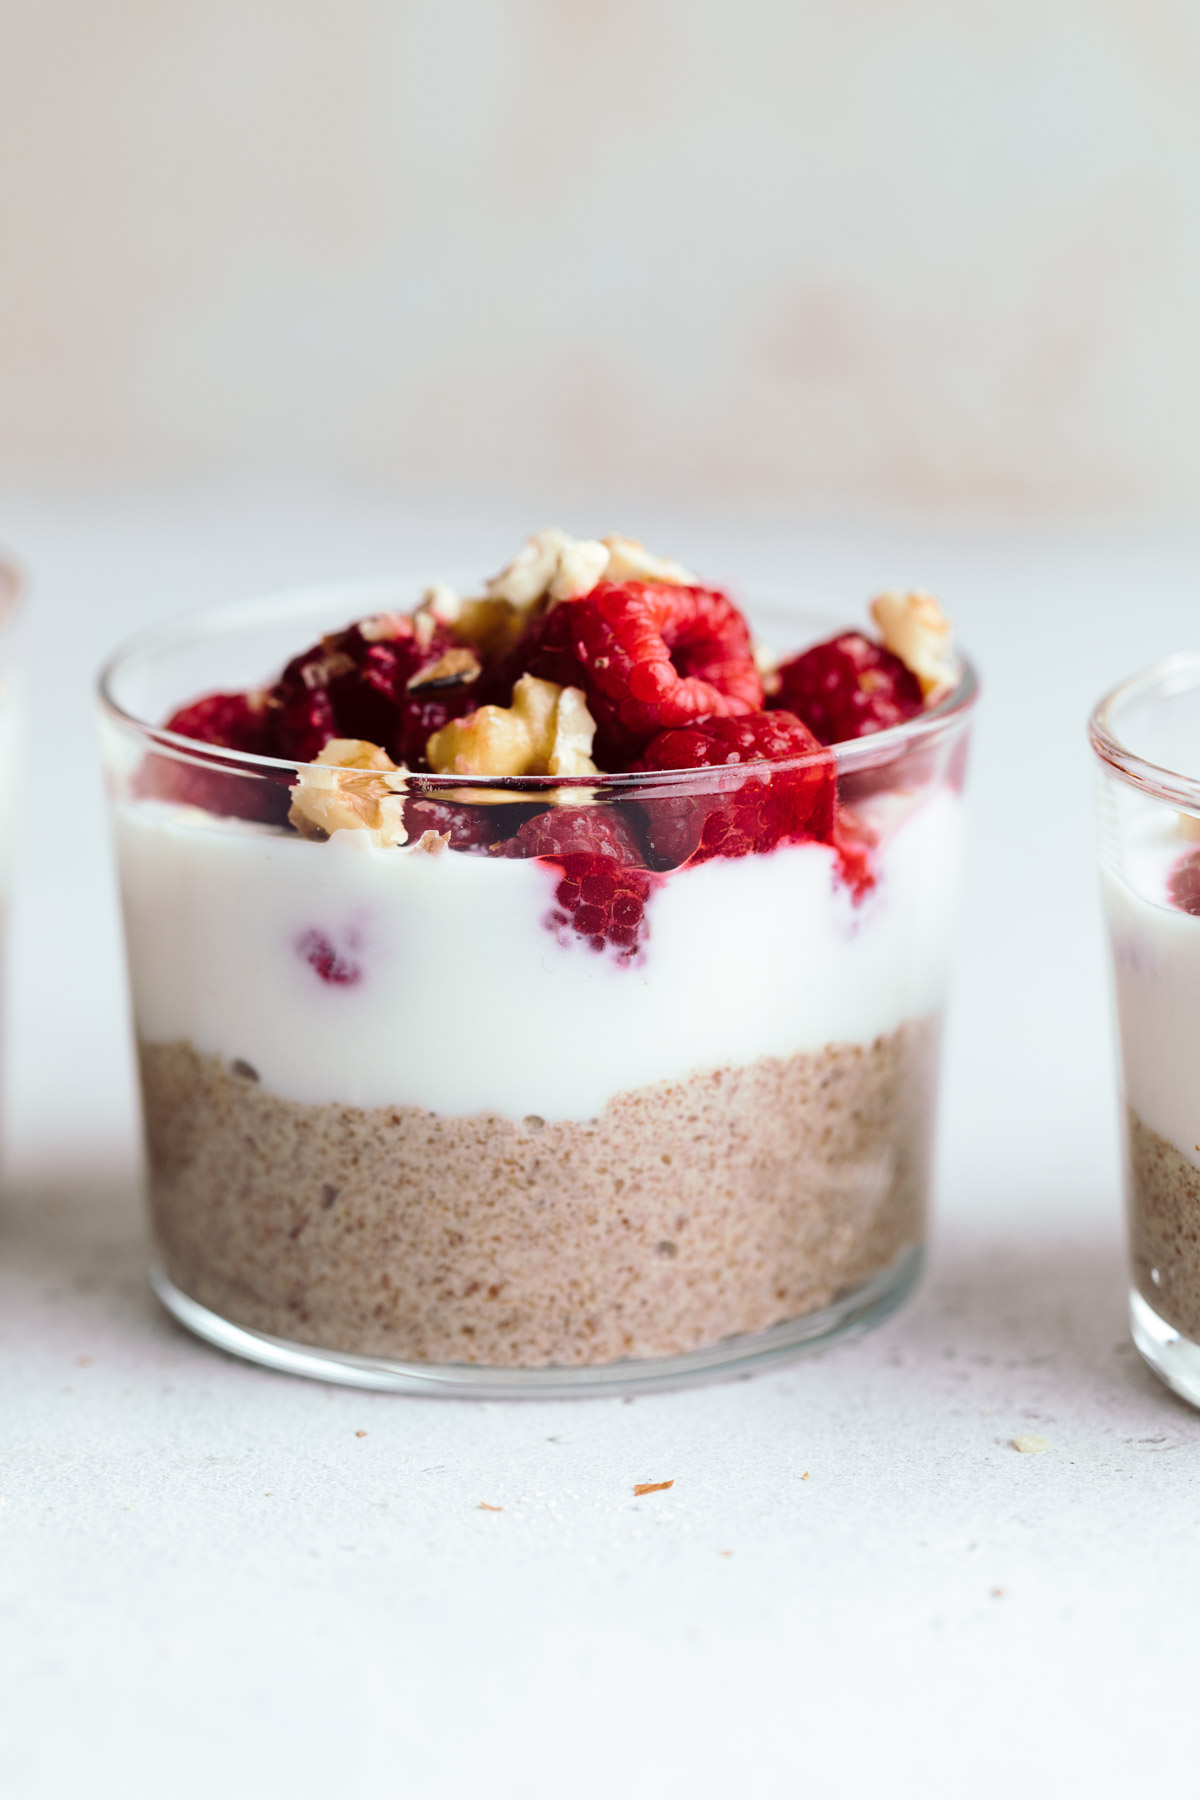 A small glasses layered with brown pudding, then white yogurt and then red raspberries with chopped walnuts on a light grey backdrop.